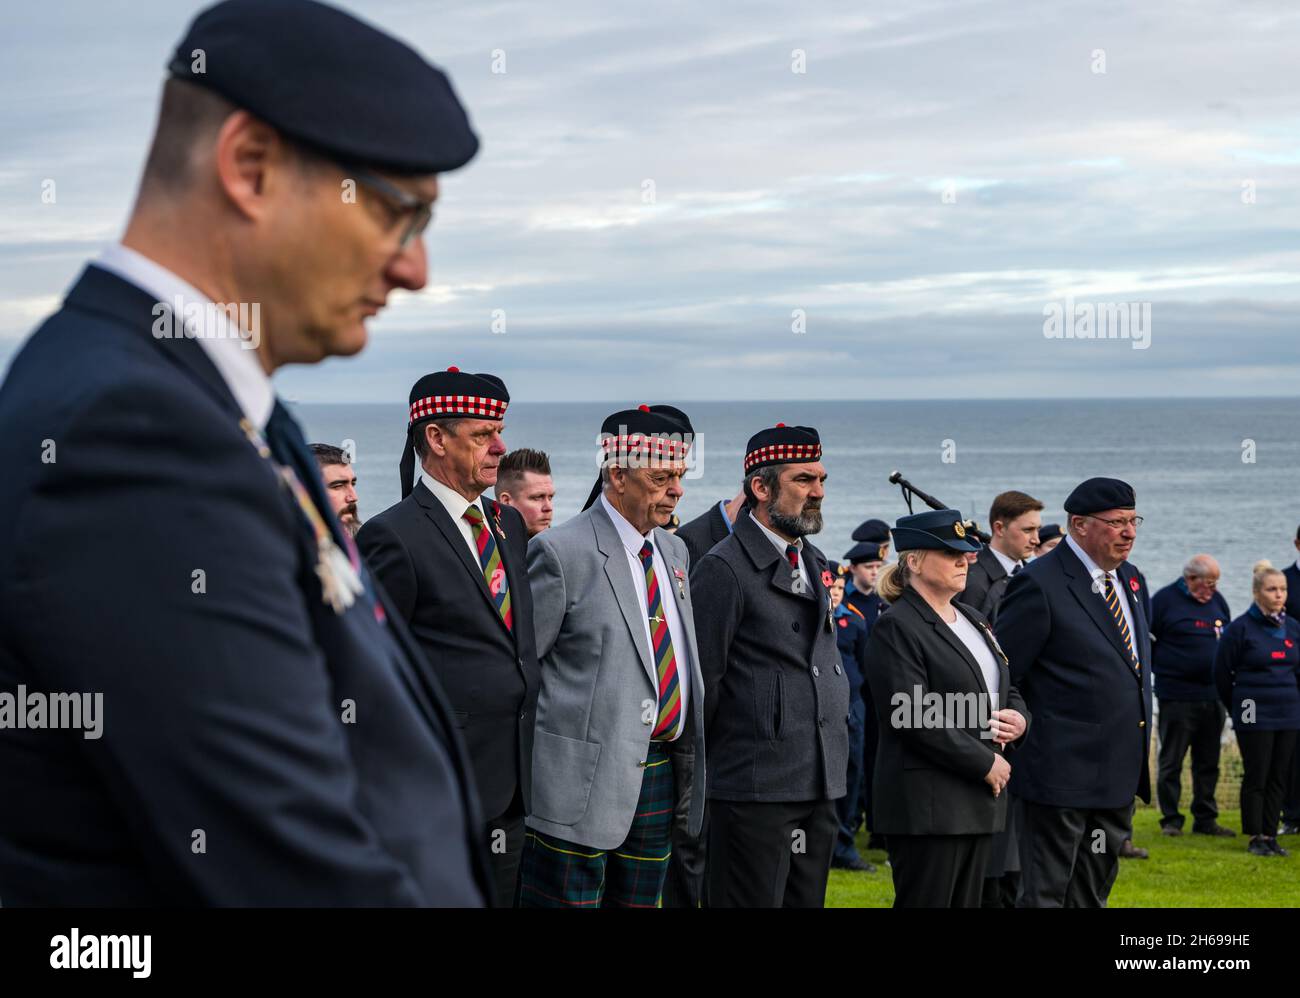 Dunbar, East Lothian, Scotland, United Kingdom, 14th November 2021. Remembrance Day: a commemorative service at the war memorial for a commemorative service. Pictured: veterans at the ceremony Stock Photo